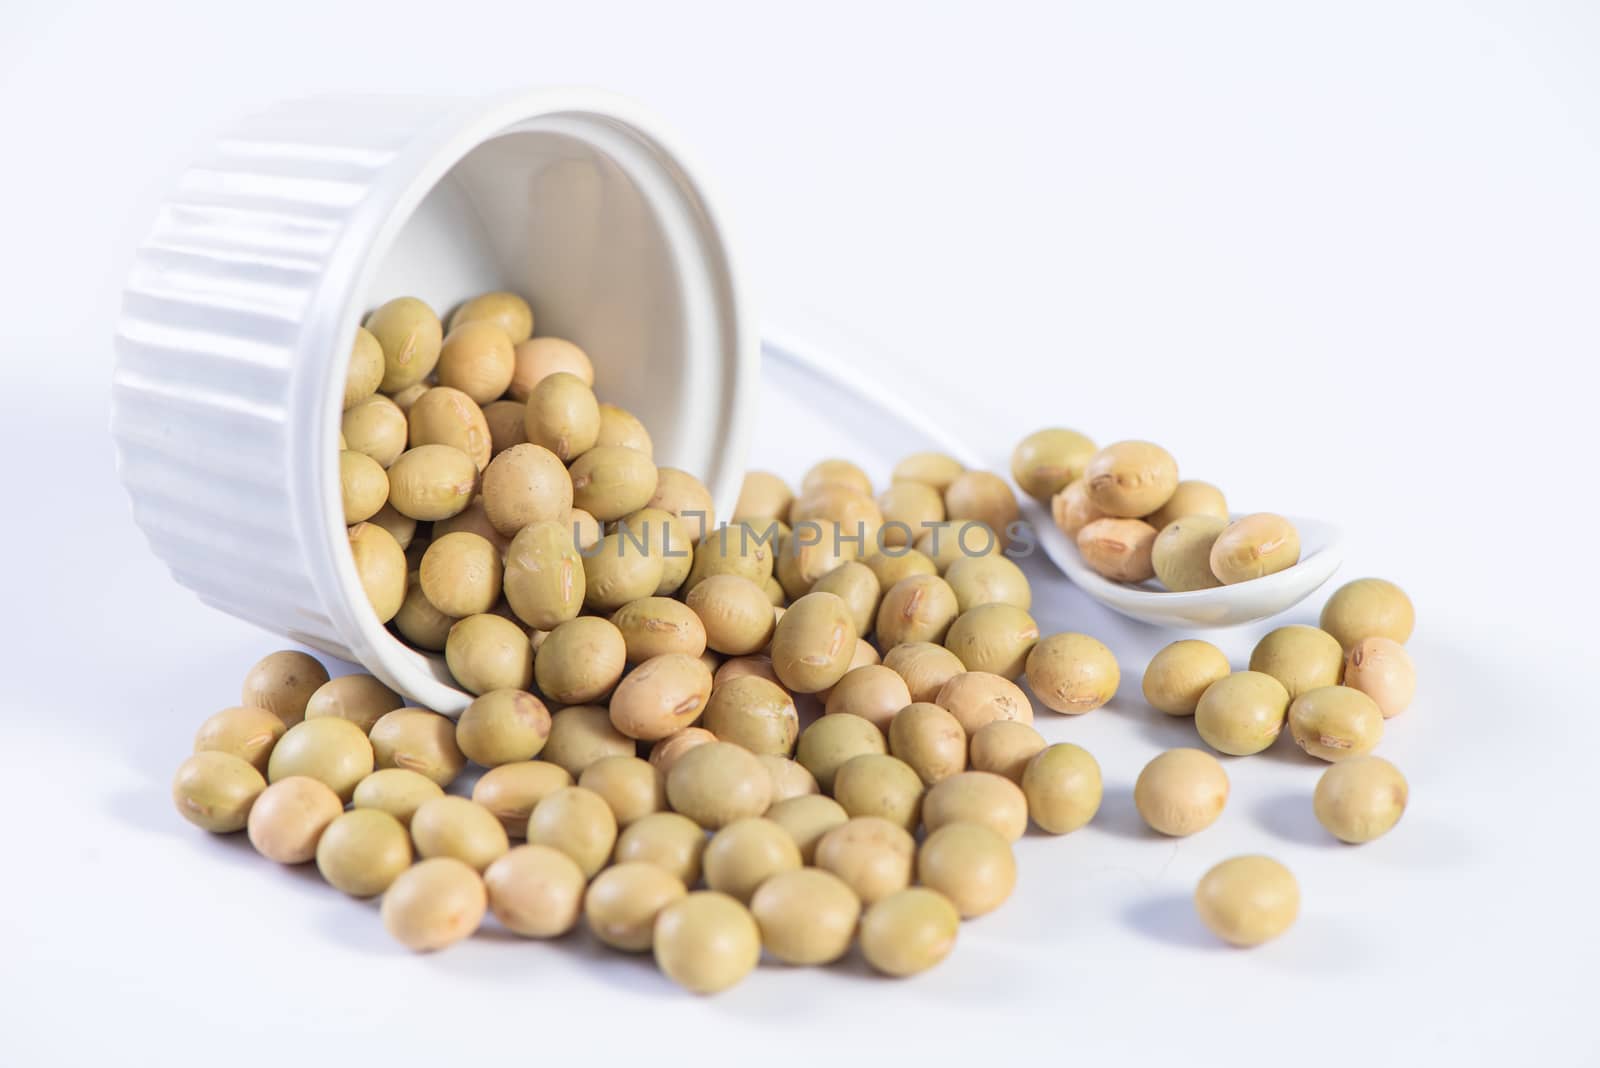 Yellow-green Taiwanese organic non-GMO soybeans, soy beans in a  by ROMIXIMAGE